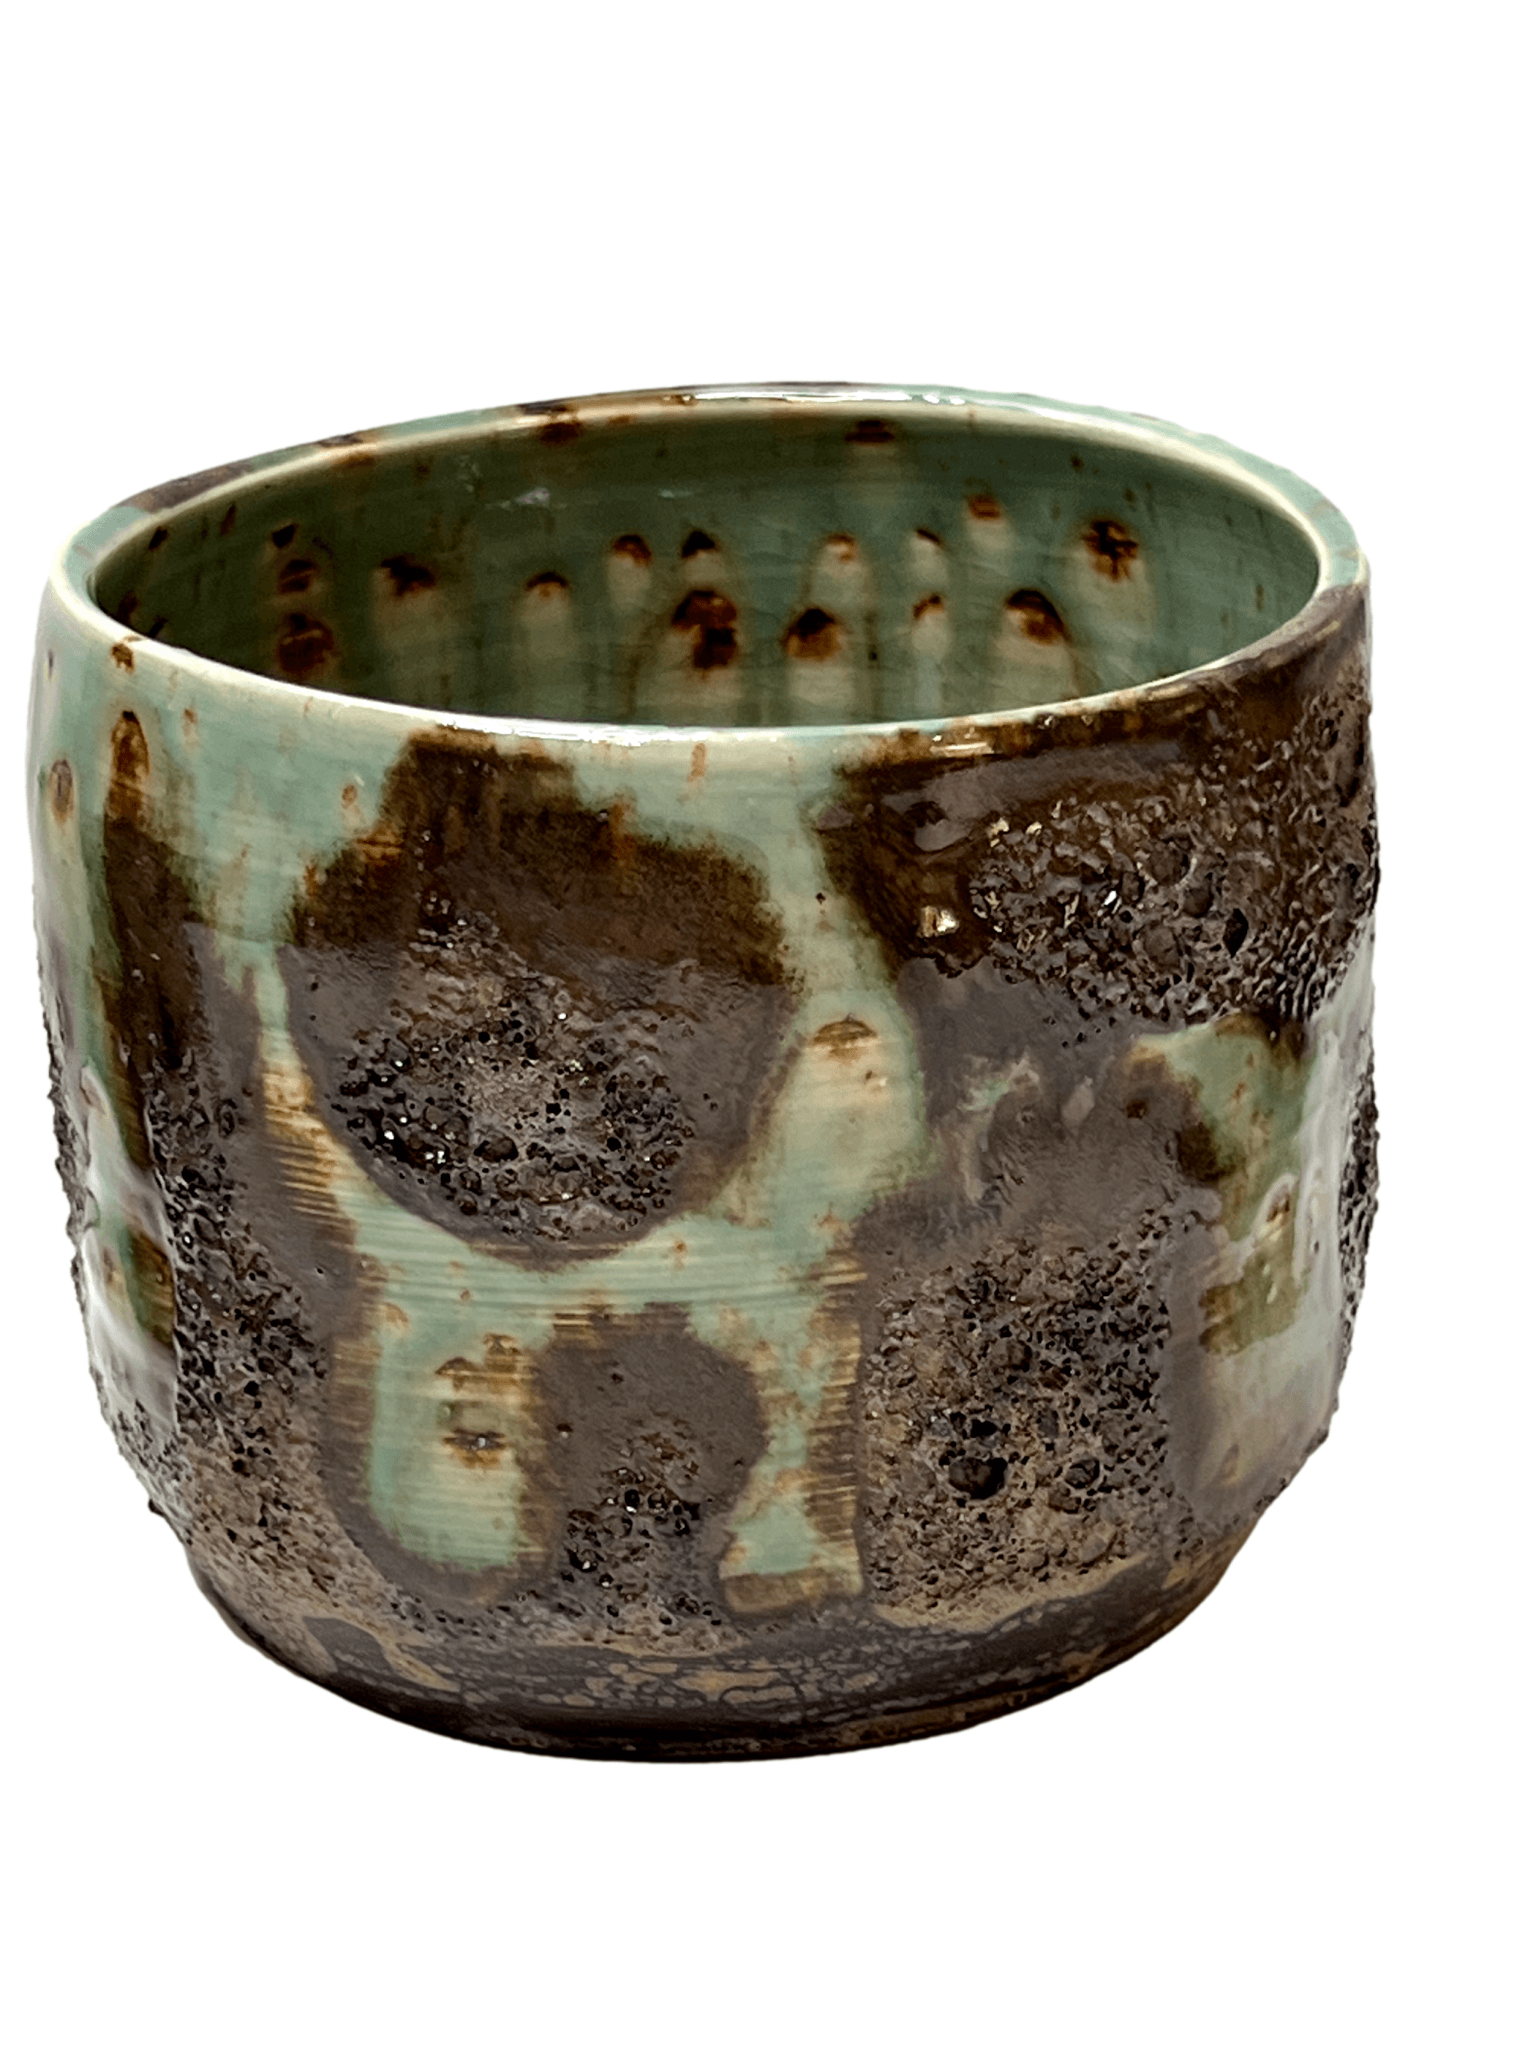 Pottery Planter Pot Wheel Thrown Clay Creatively Glazed Handcrafted By New Mexico Artist - Ysleta Mission Gift Shop- VOTED El Paso's Best Gift Shop